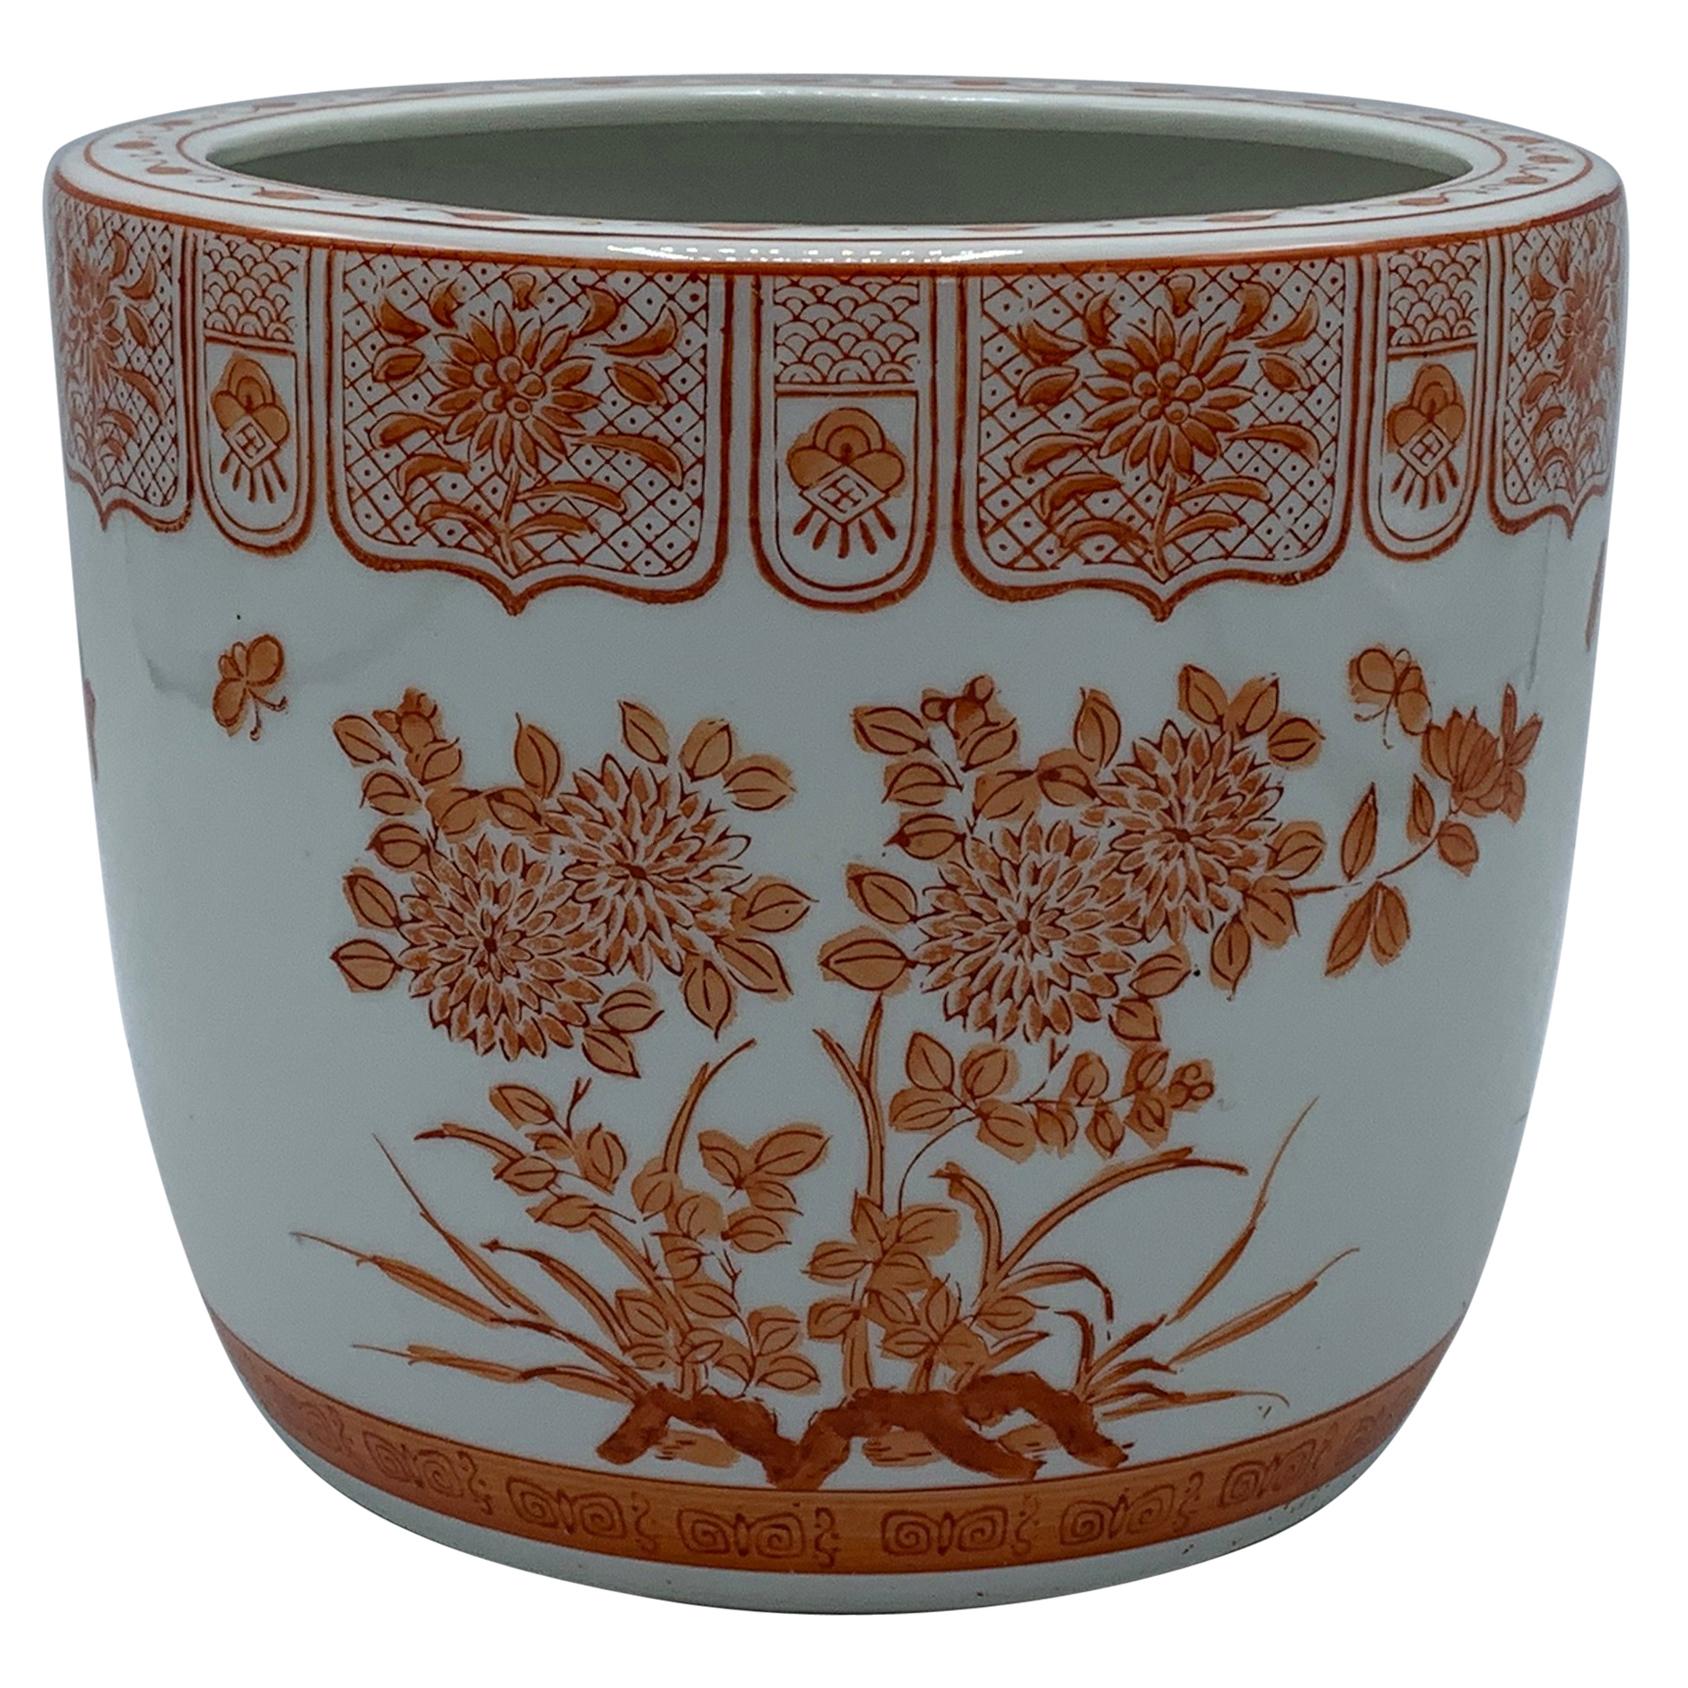 1970s Orange and White Floral Painted Cachepot